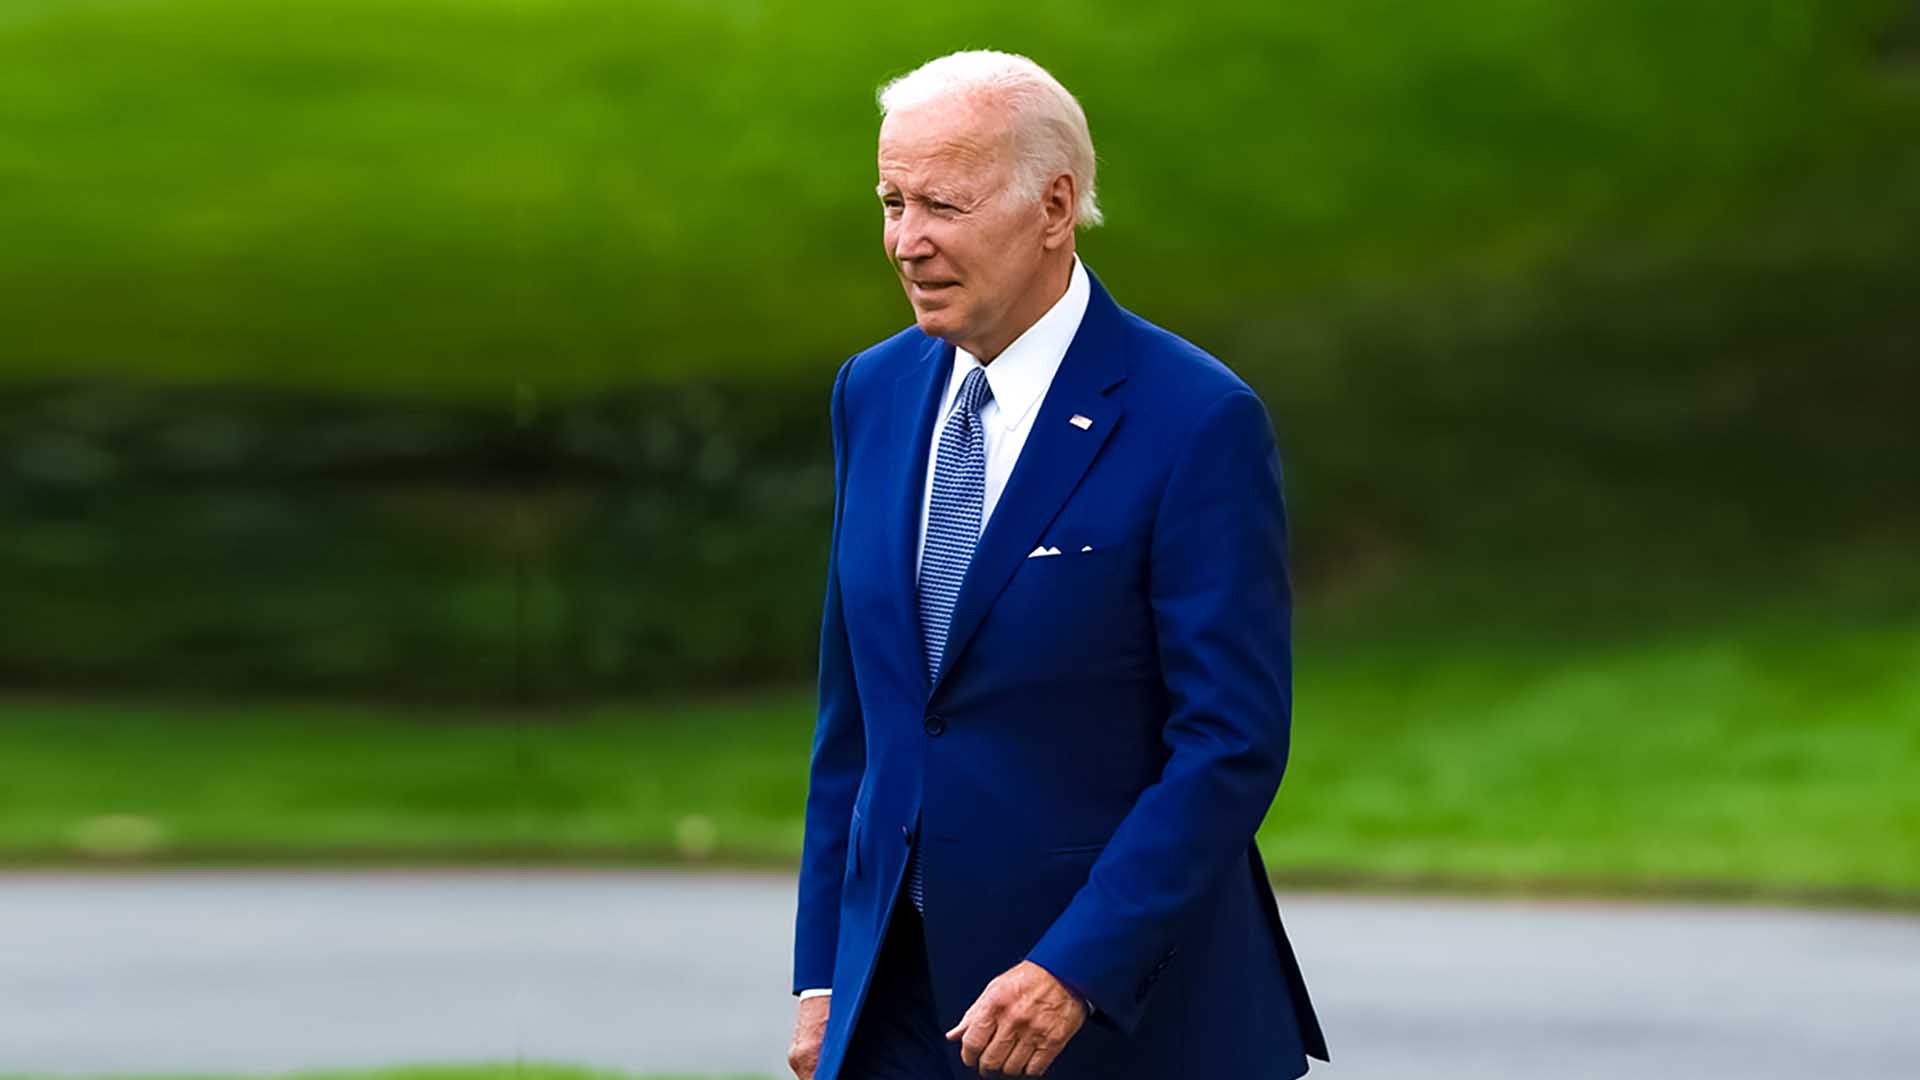 White House reports Biden is positive for COVID-19 but exhibits mild symptoms